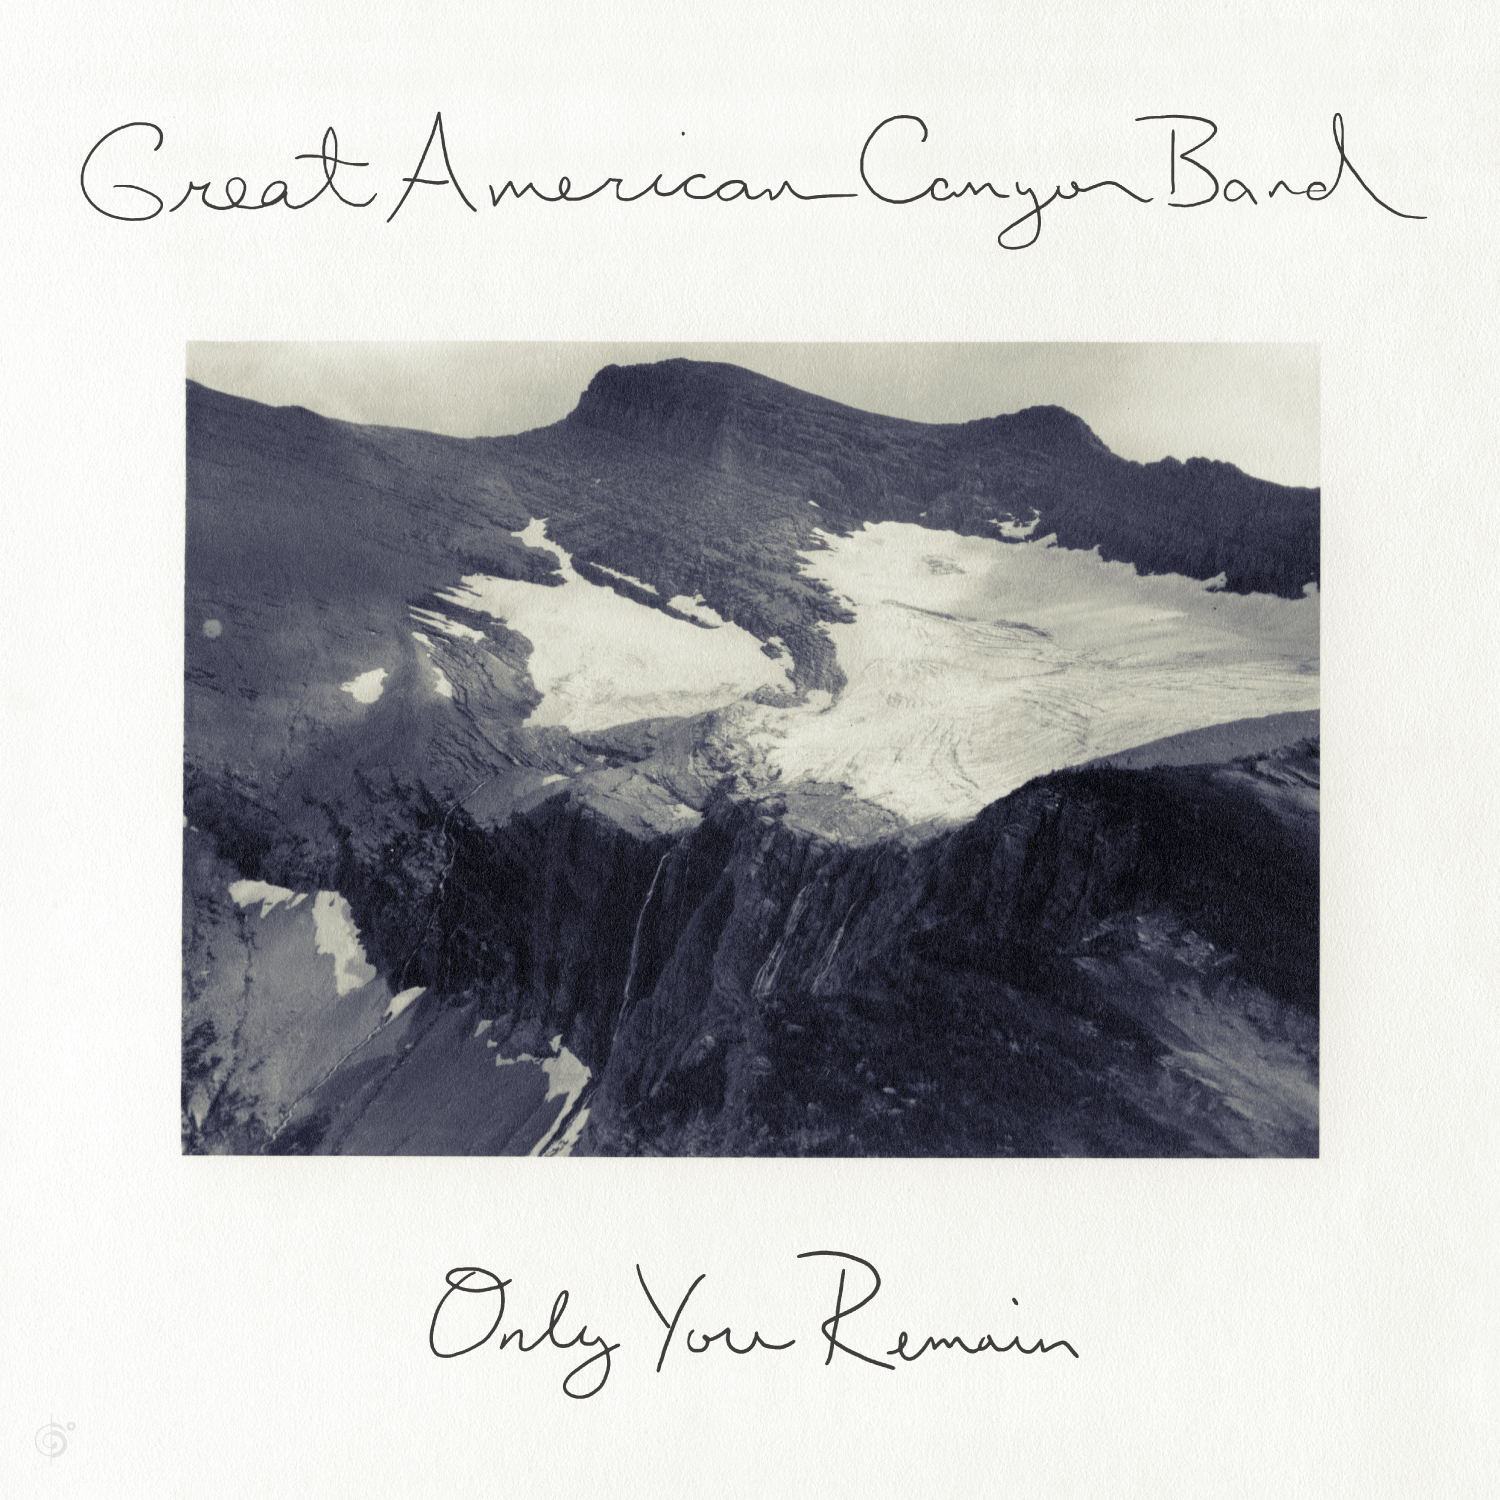 Great American Canyon Band – Only You Remain